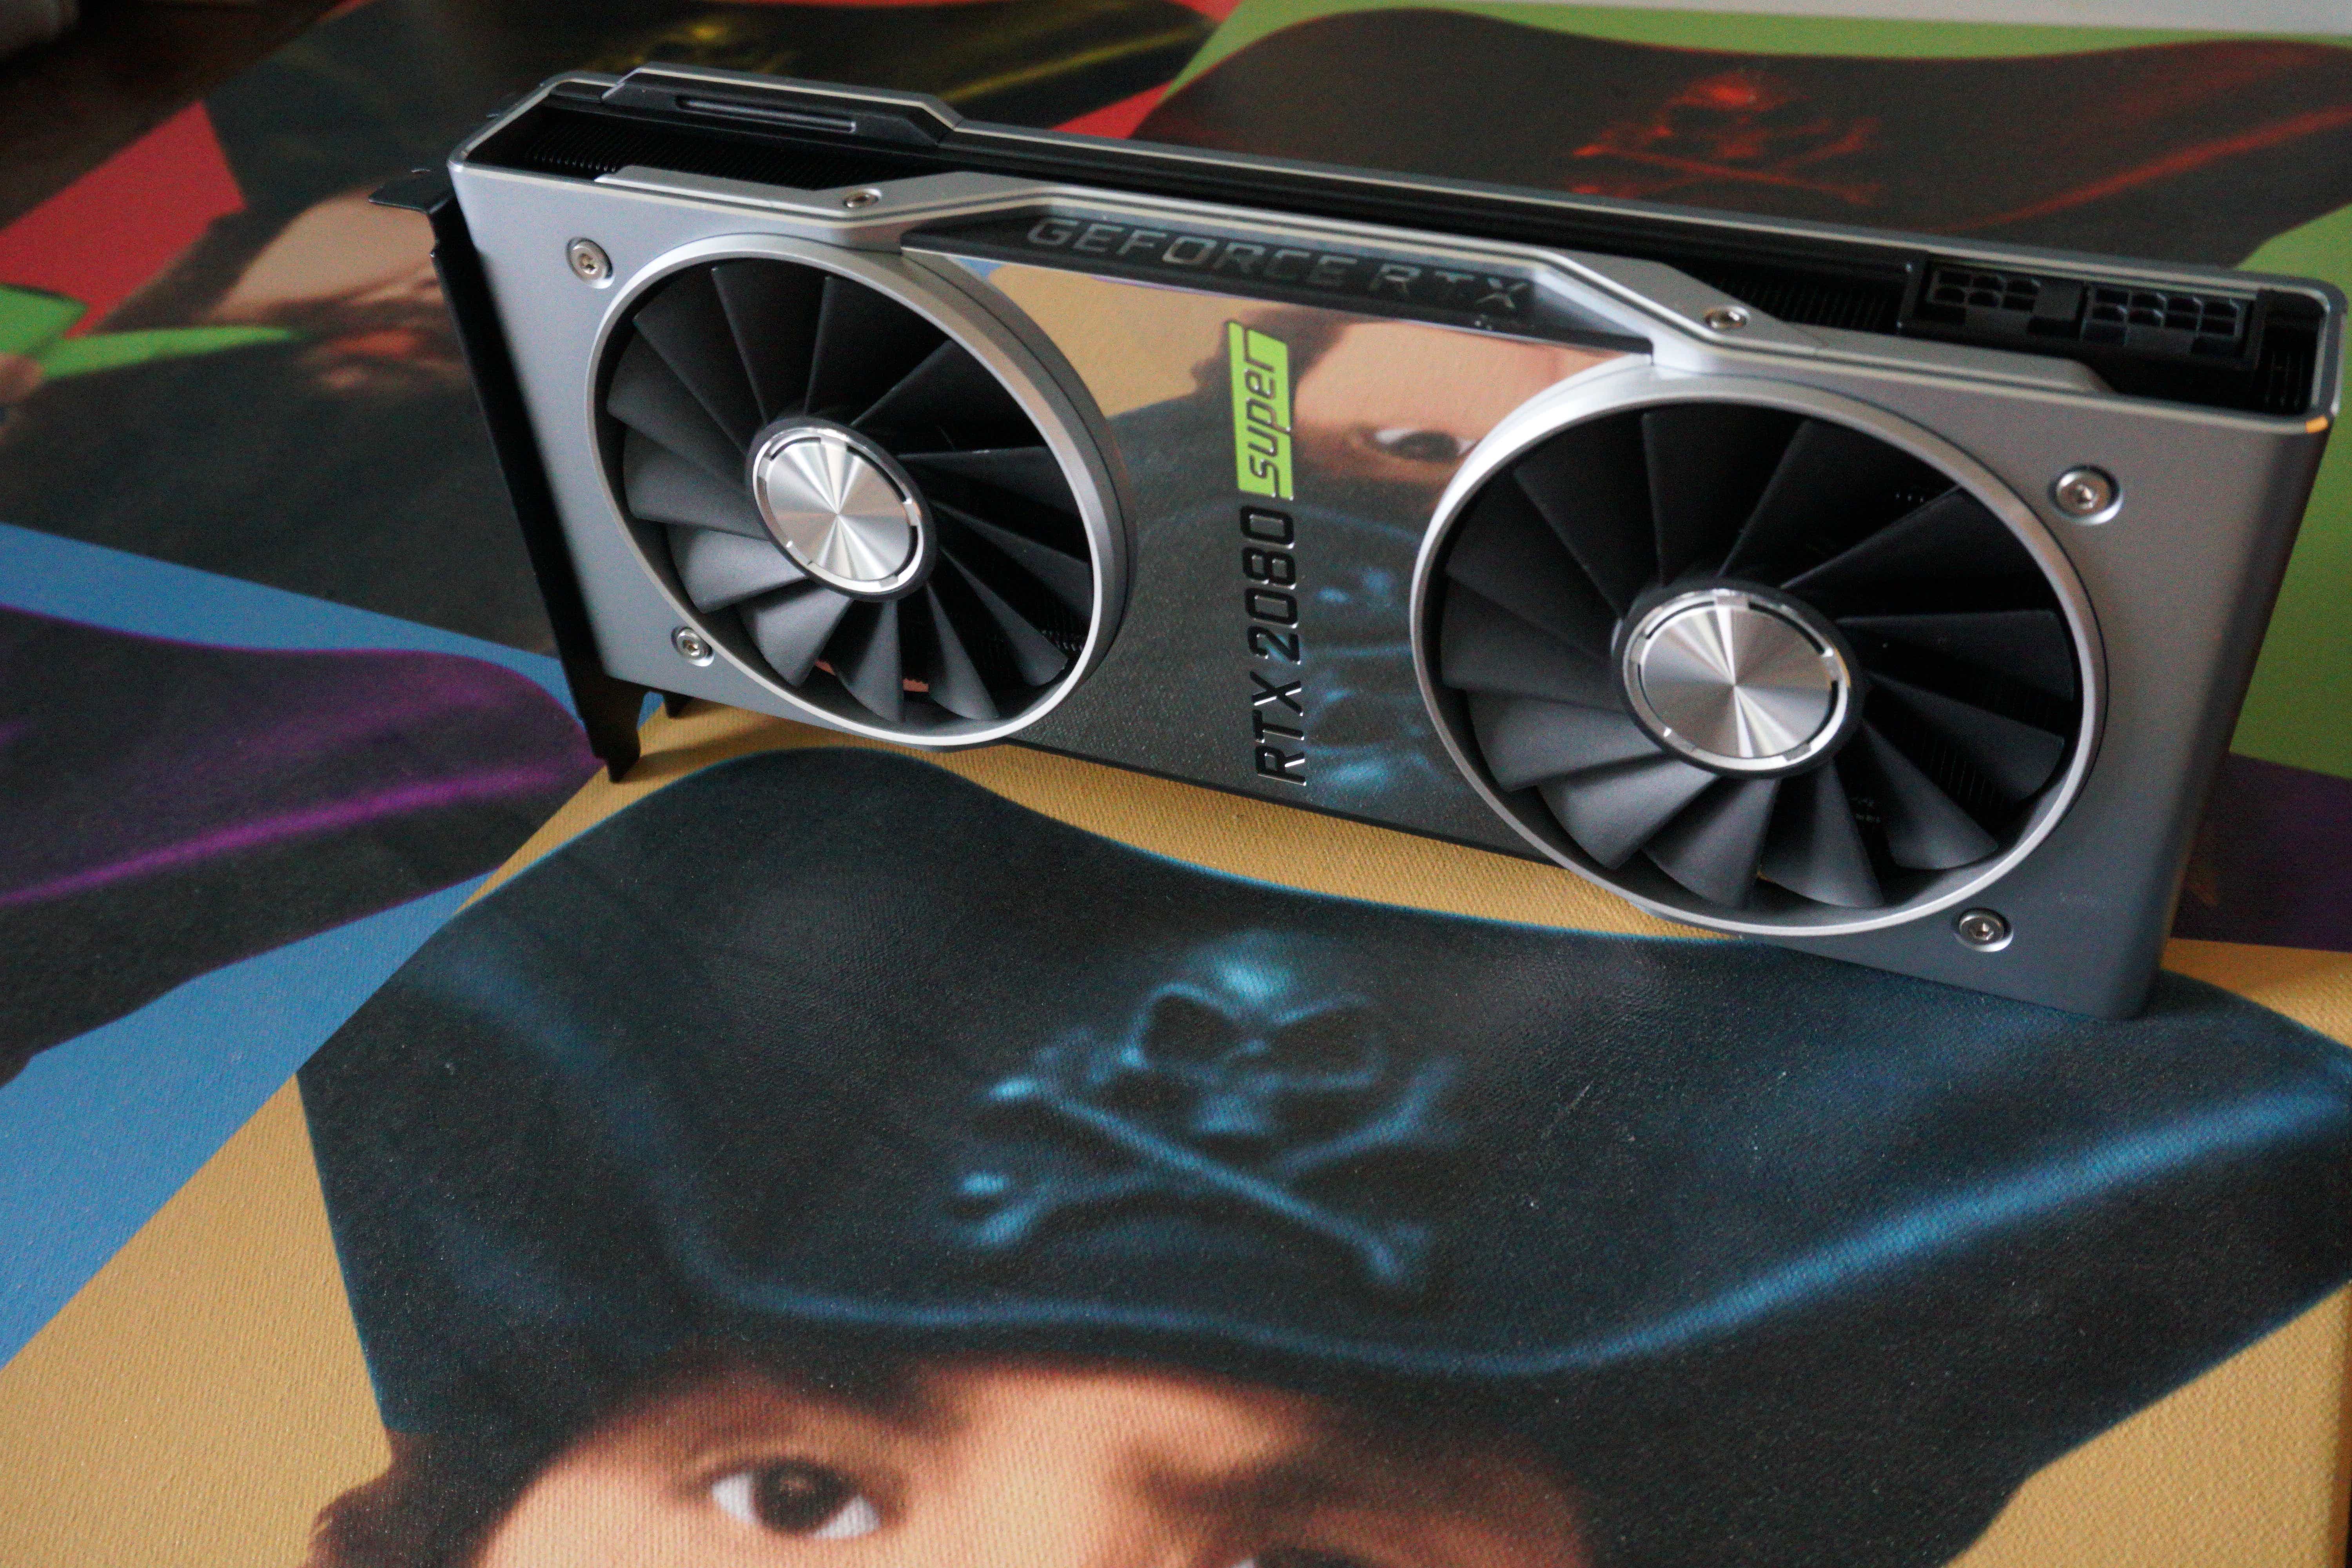 GeForce RTX 2080 Super Founders Edition